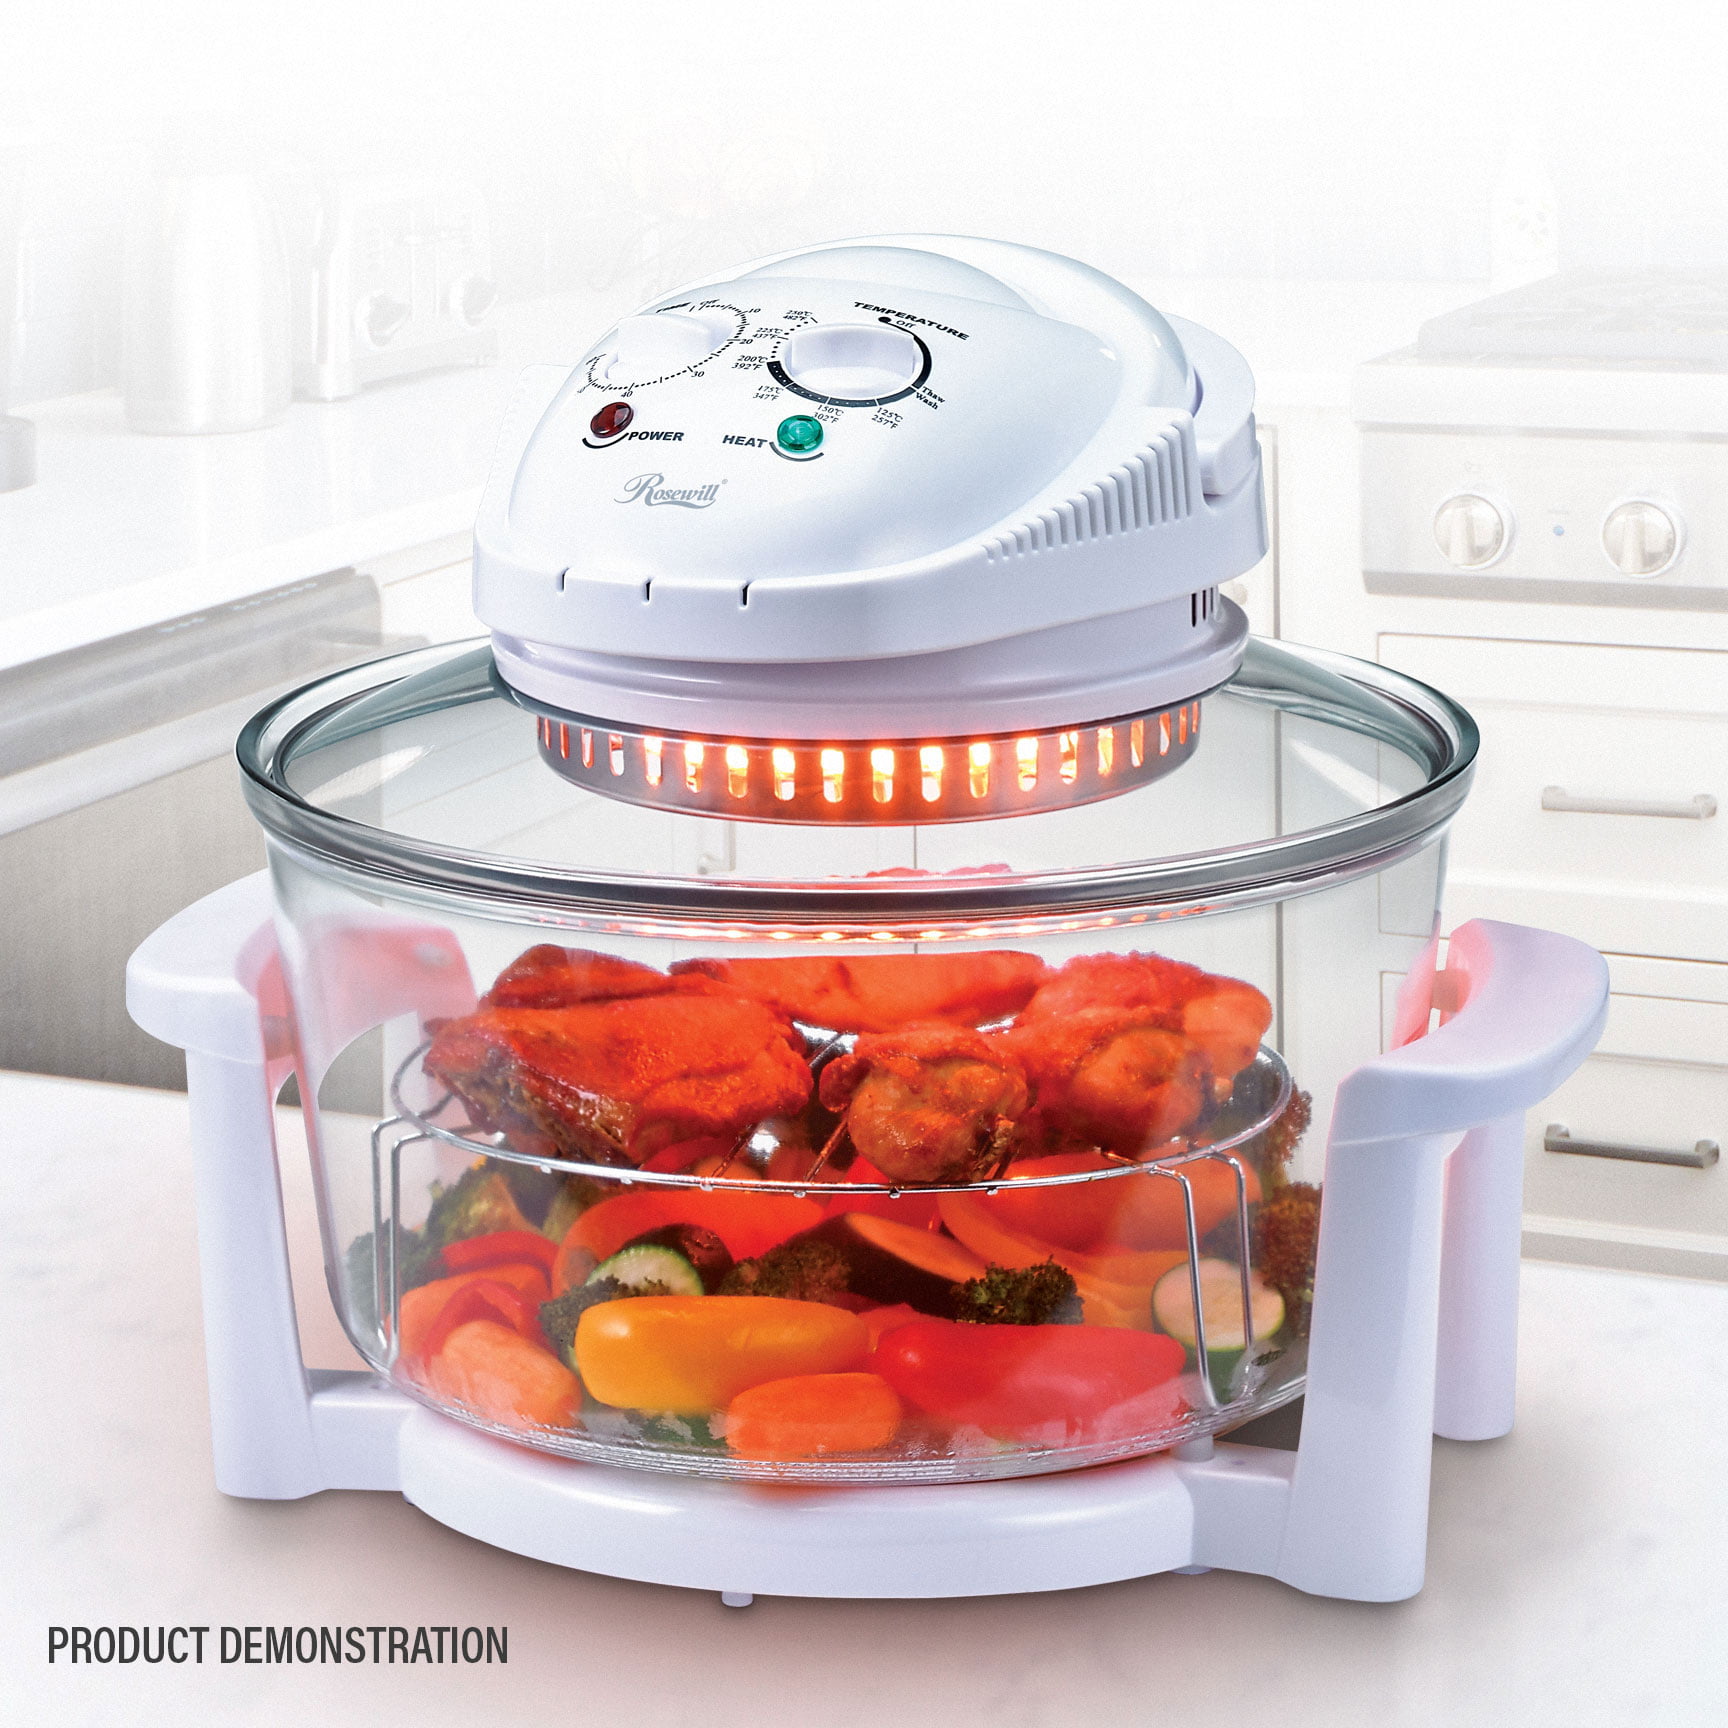 Rosewill R Hco 15001 Infrared Halogen Convection Oven With